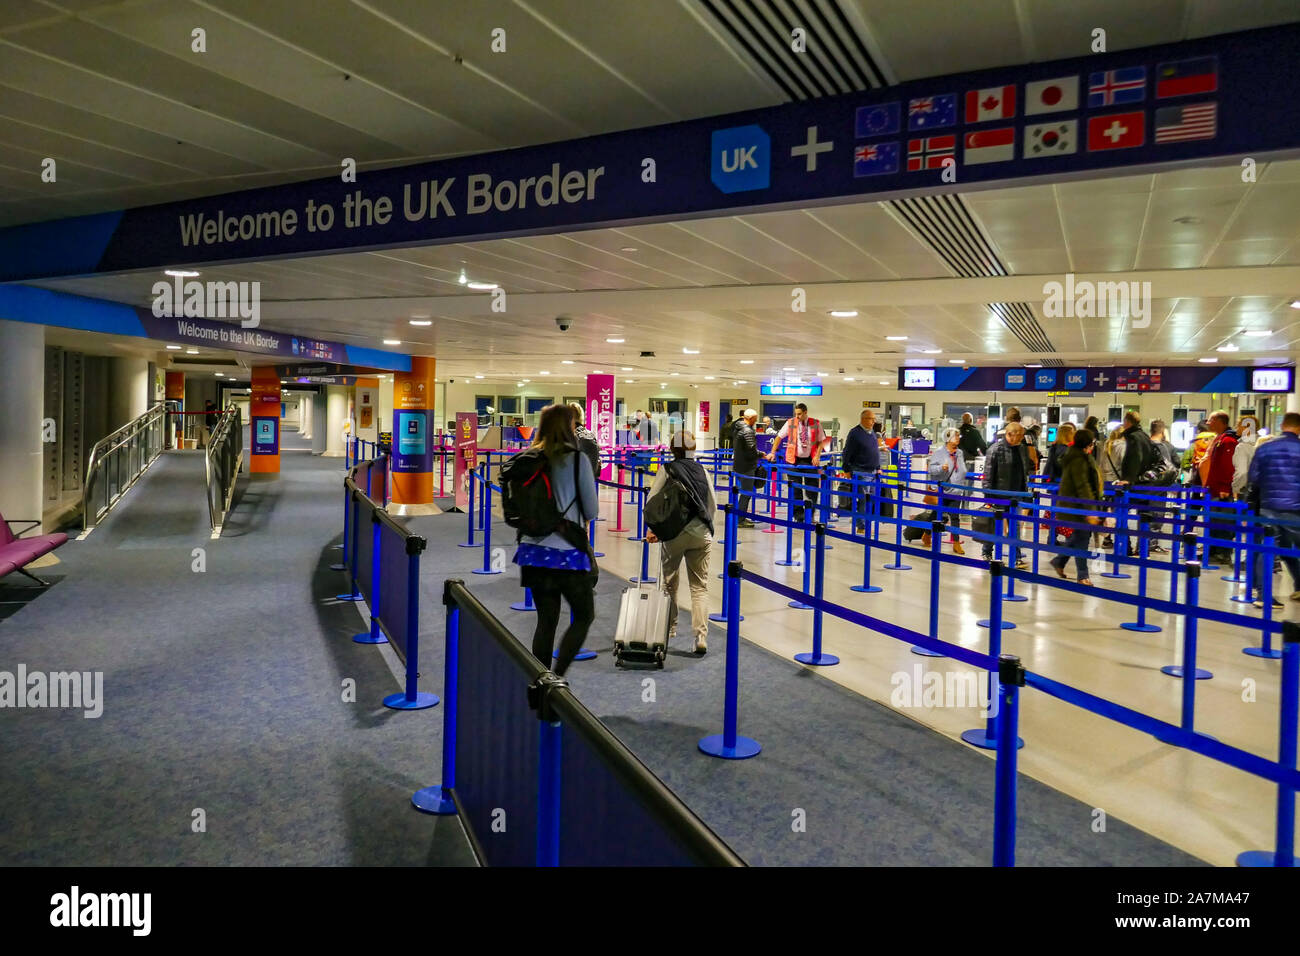 Welcome to the UK, UK border, passport control, Brexit, queue at UK border, Manchester airport Stock Photo